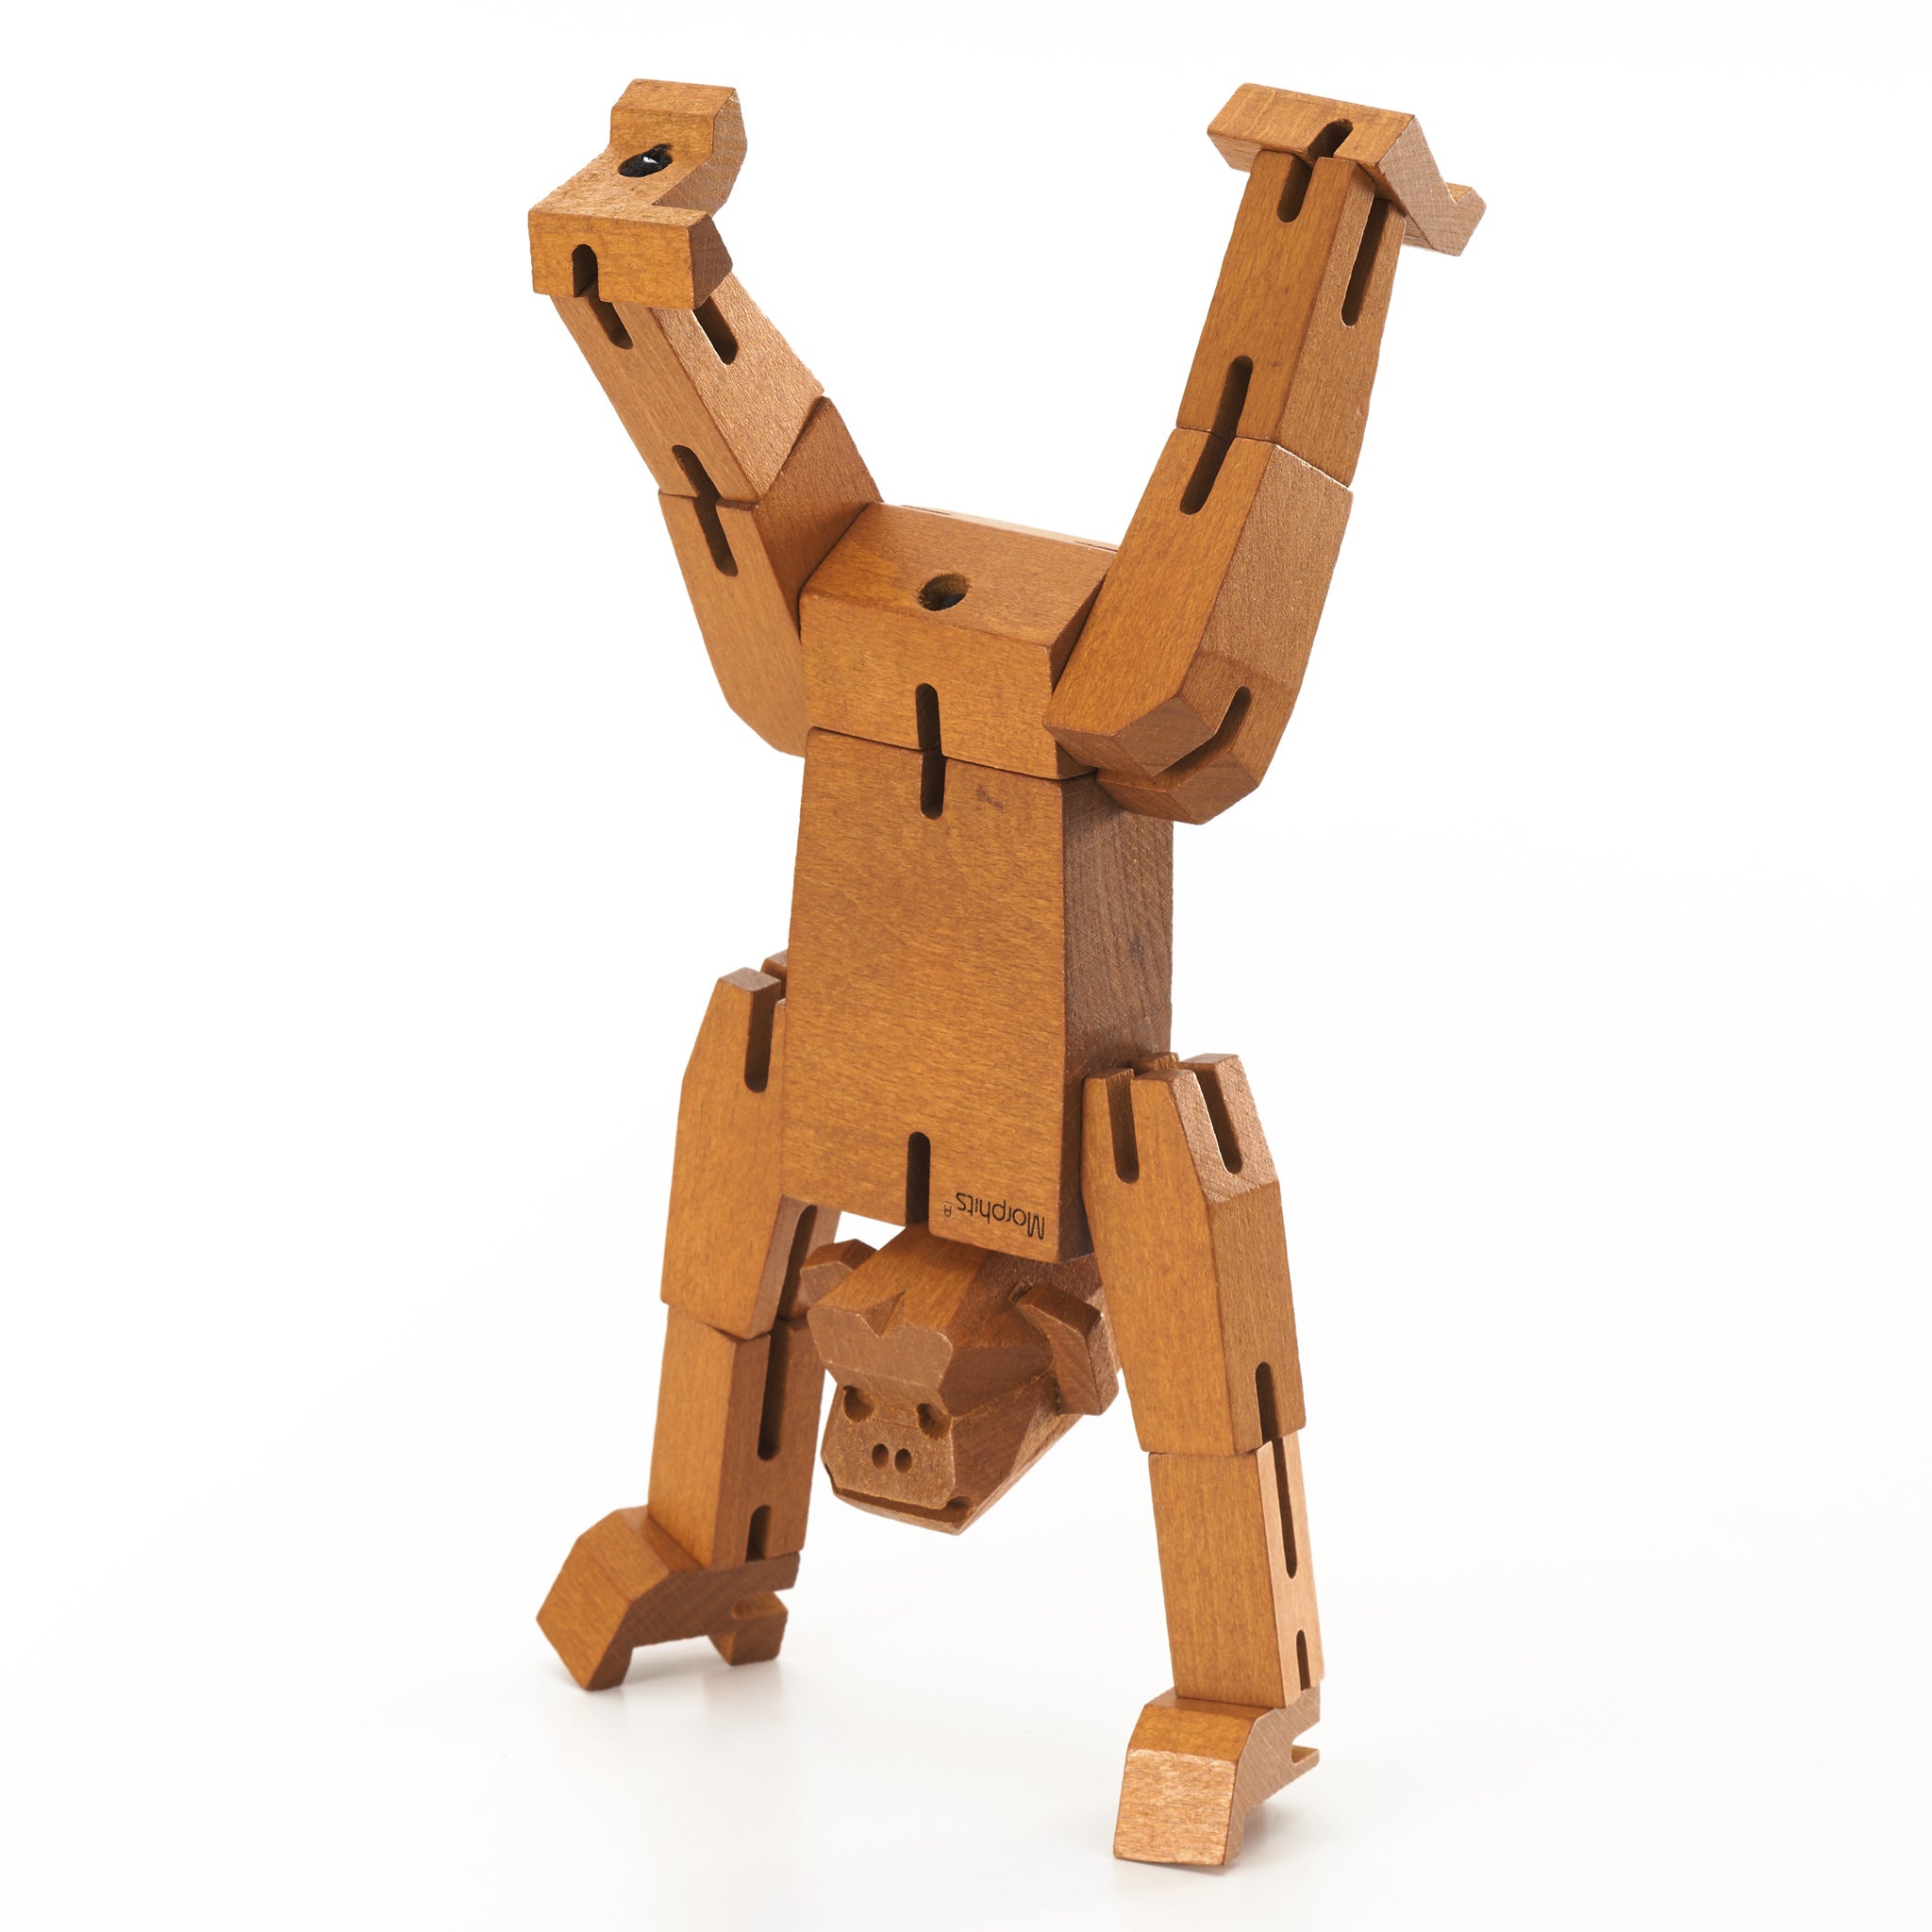 Morphits ® Monkey Wooden Toy: Unleash Creativity with Poseable Wooden Playset - Yoshiaki Ito Design Stand T2